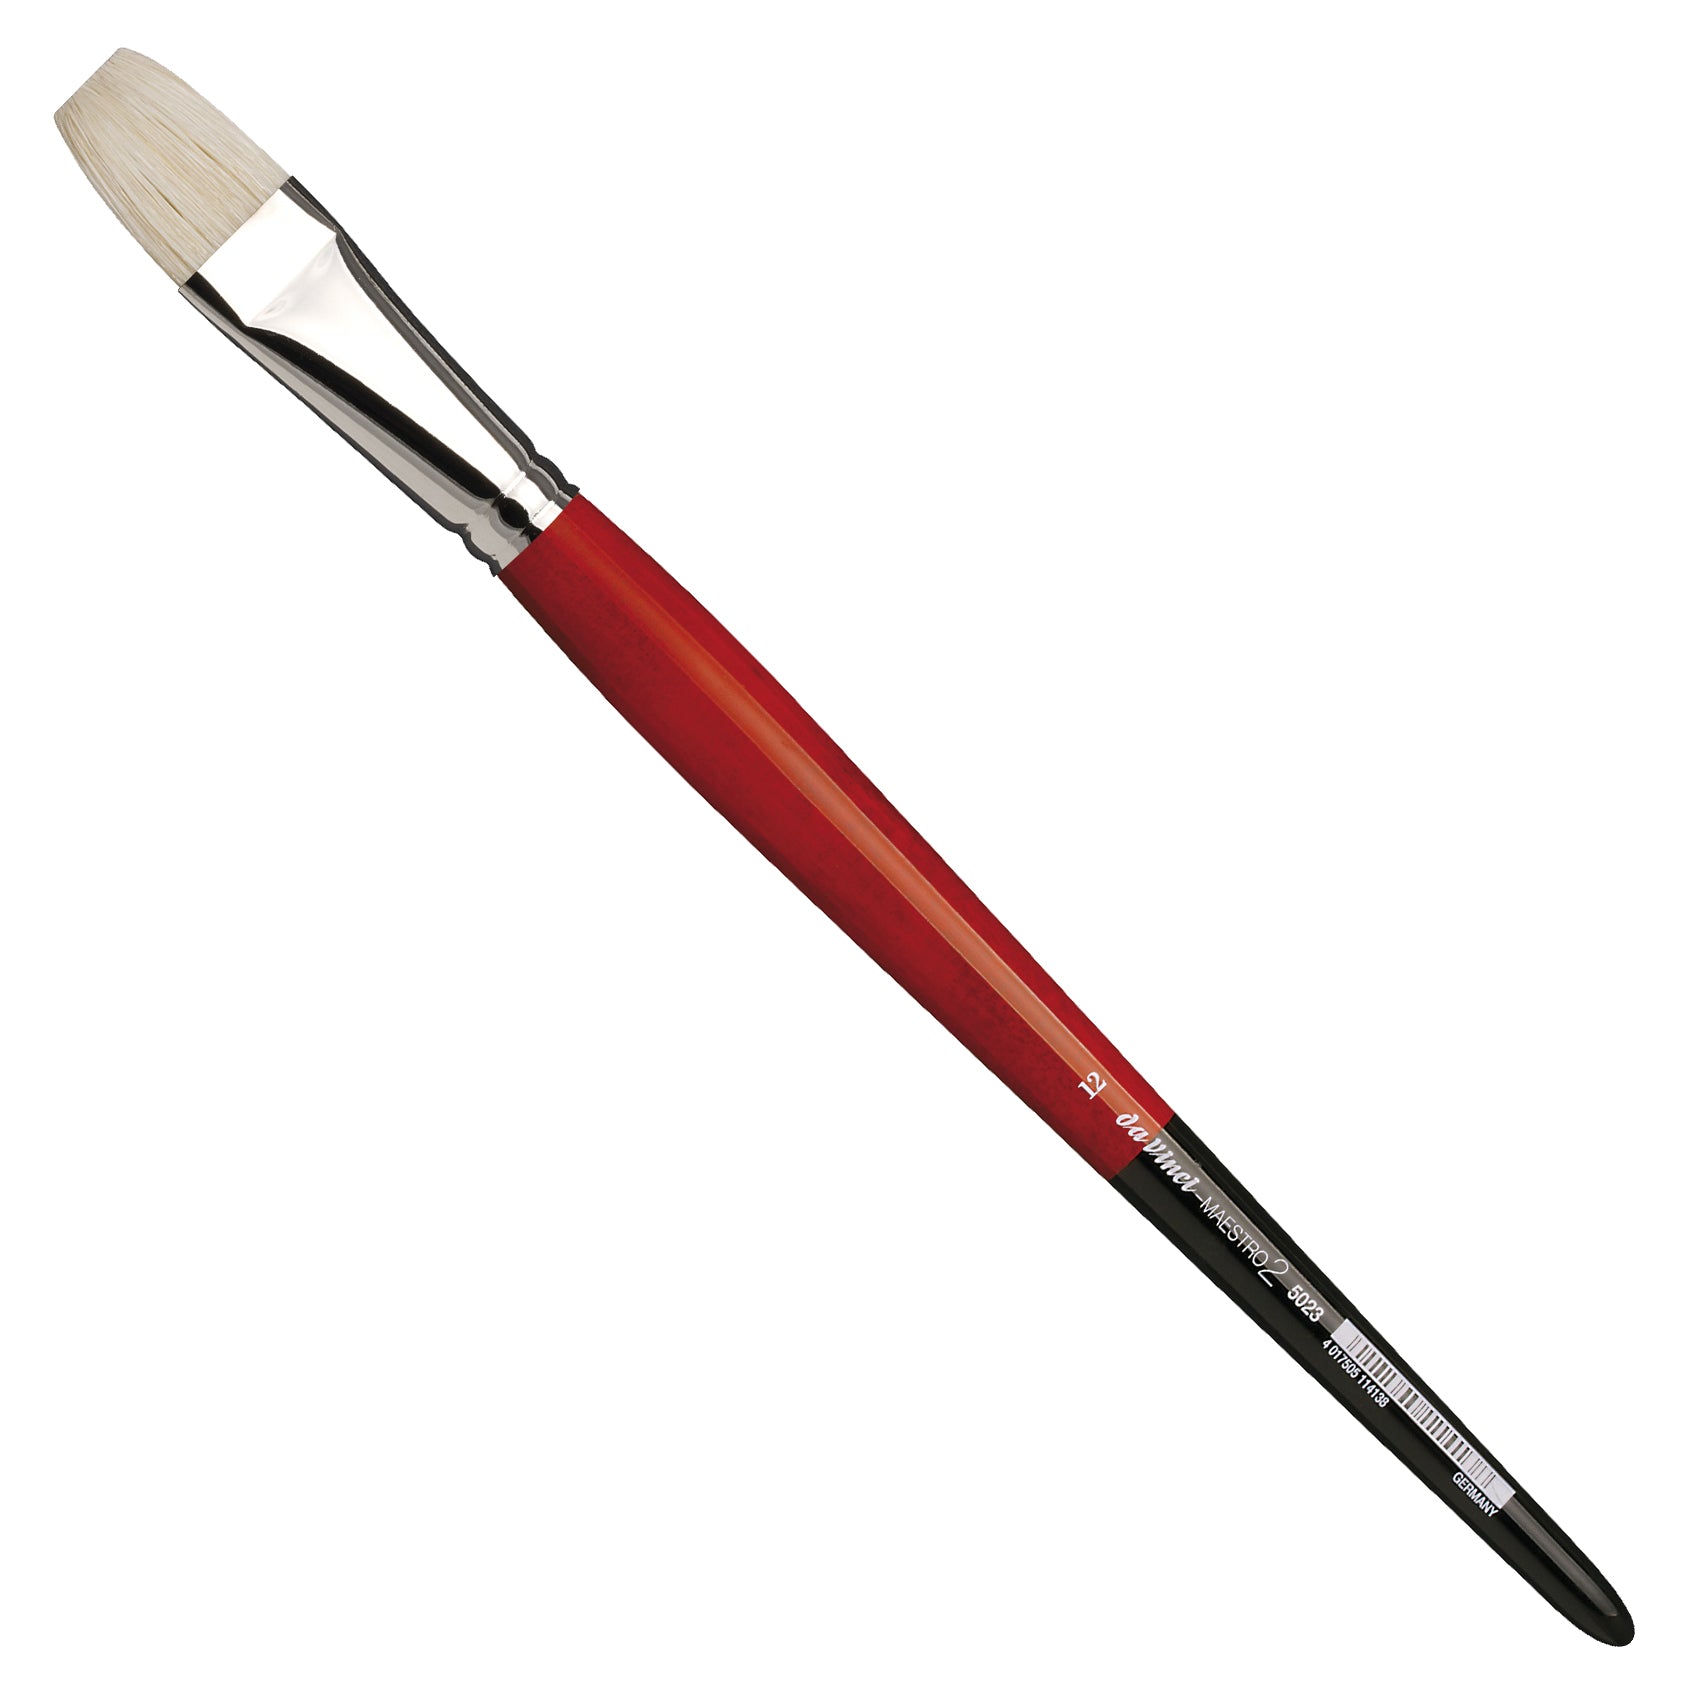 The Da Vinci Maestro 2 Bristle Brush is a high-quality brush designed to last. Its natural hog bristles are interlocked deep into the ferrule, ensuring lasting elasticity, springiness, and longevity. Additionally, this brush has excellent colour retention capabilities. Its long red handle with black ends and silver ferrules make it a great choice for oil and acrylic painting.